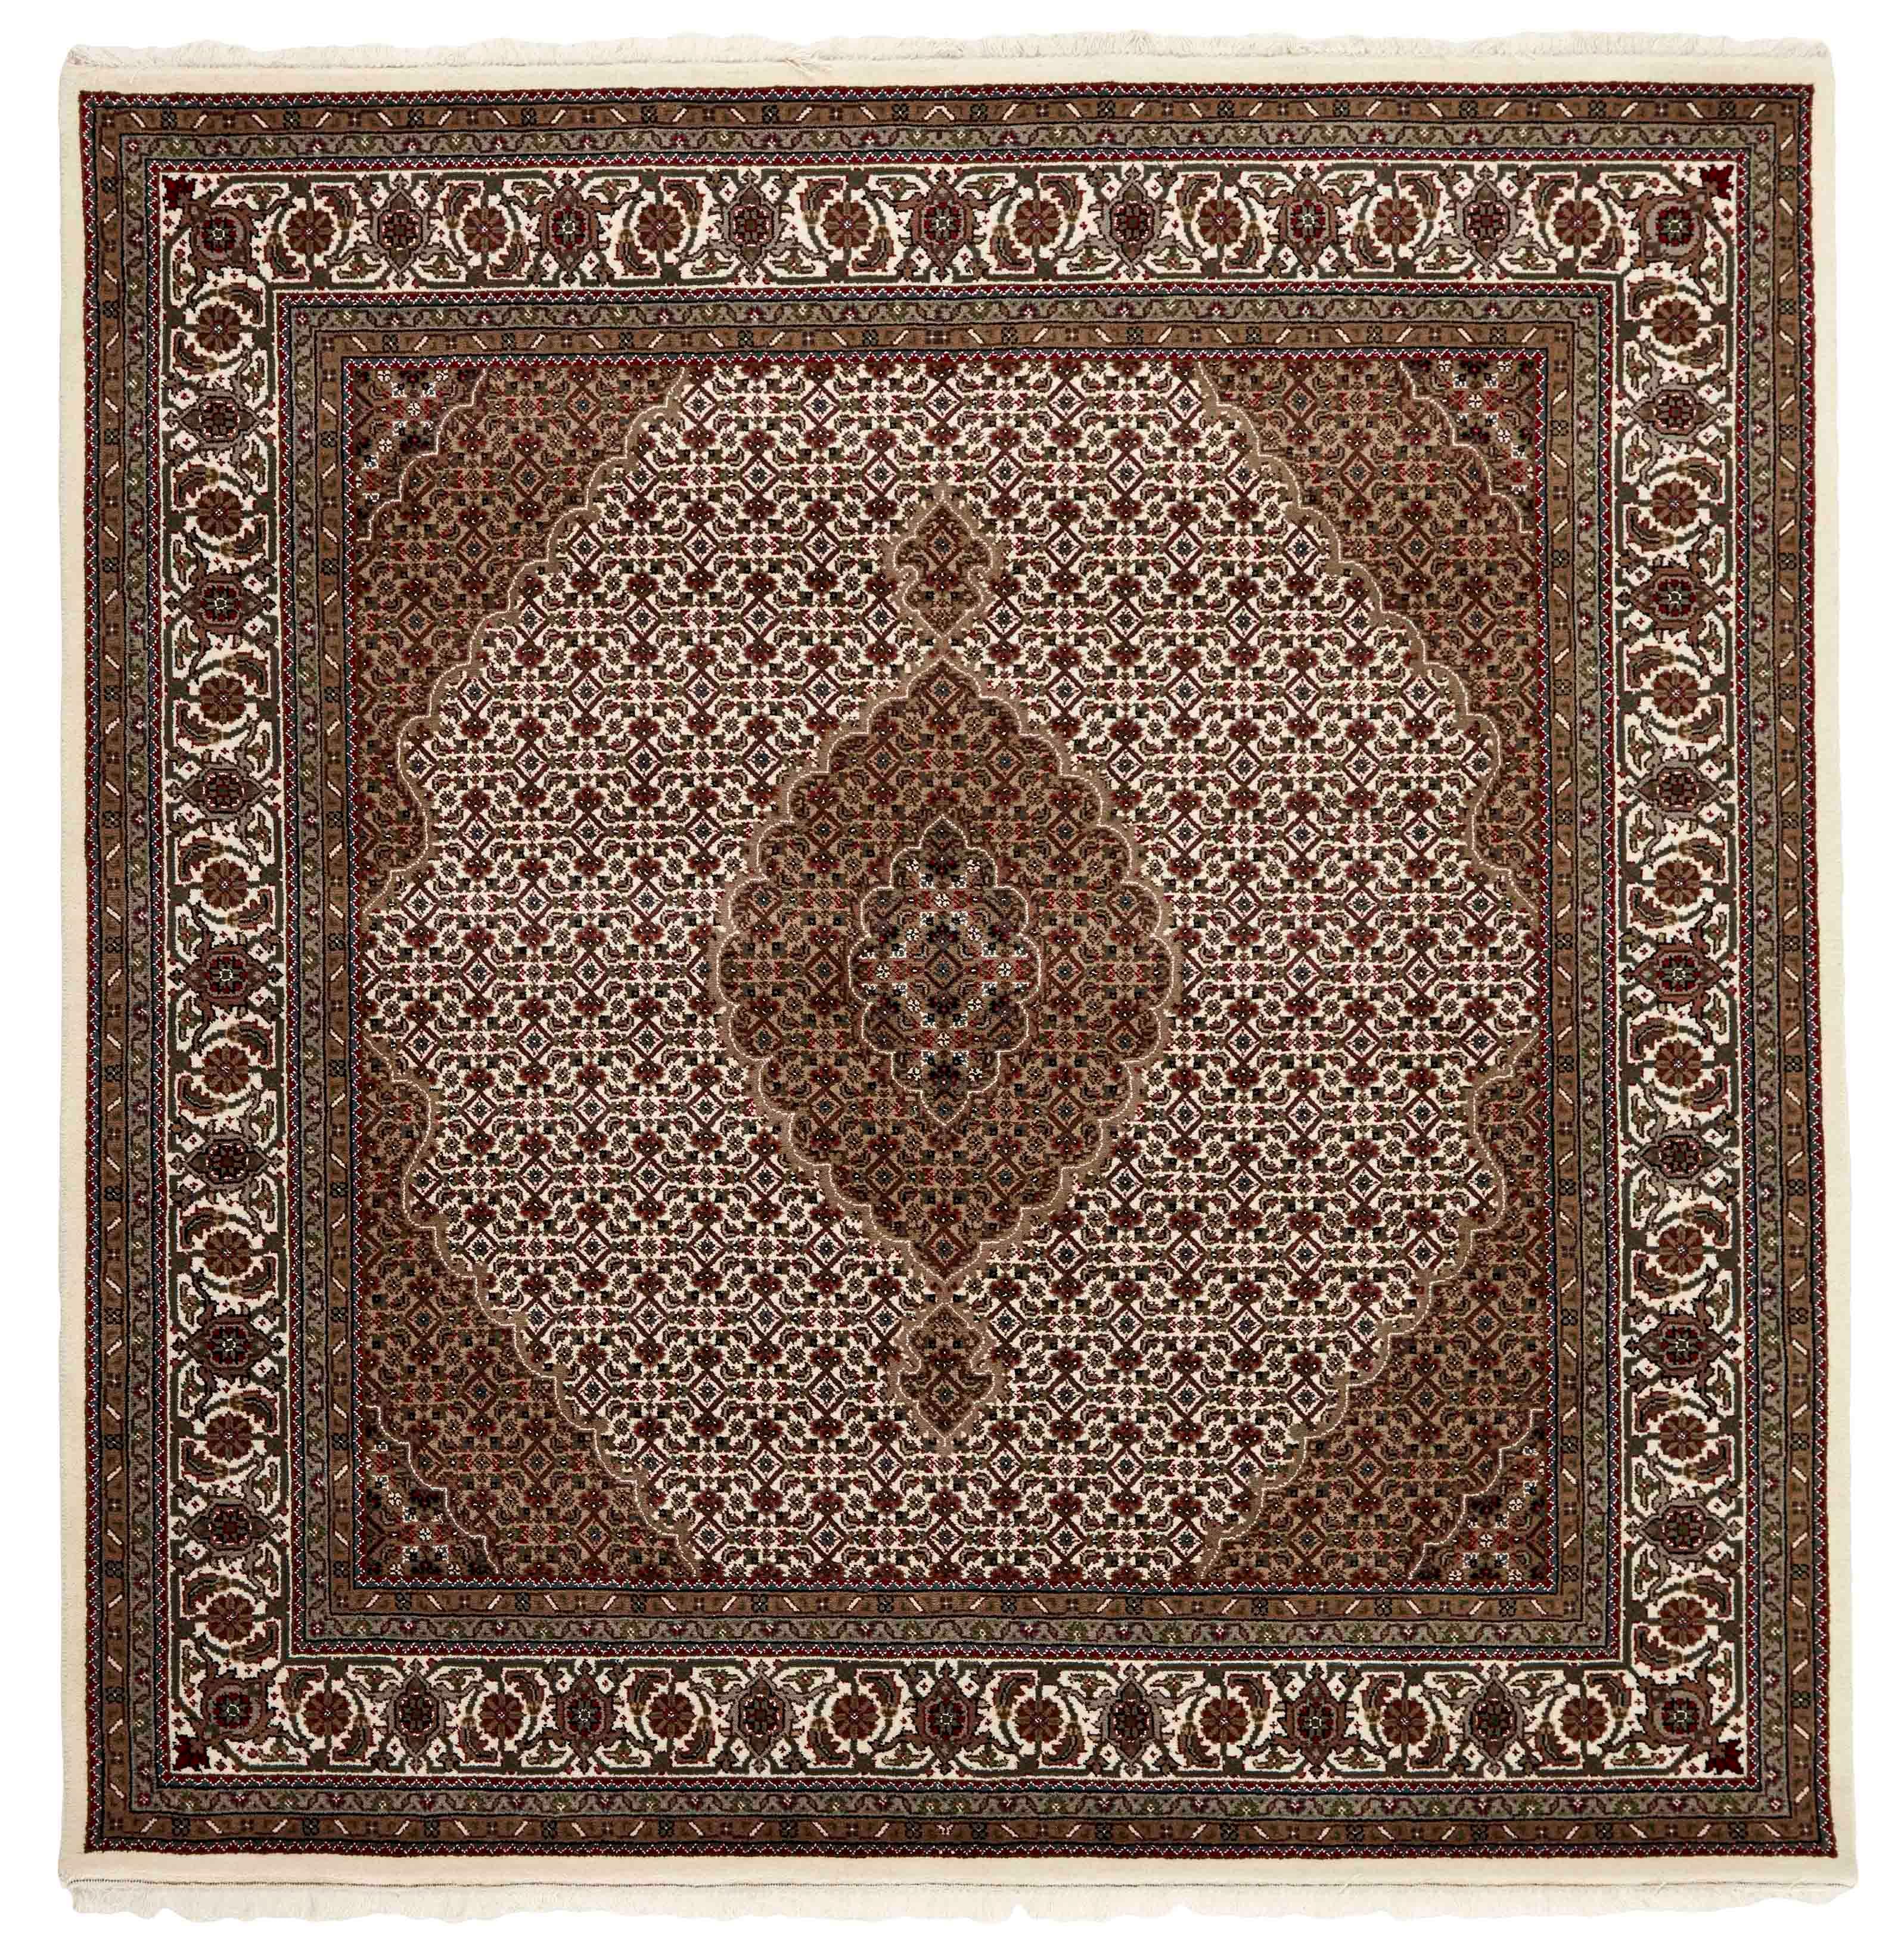 authentic oriental rug with traditional geometric and floral design in beige and red